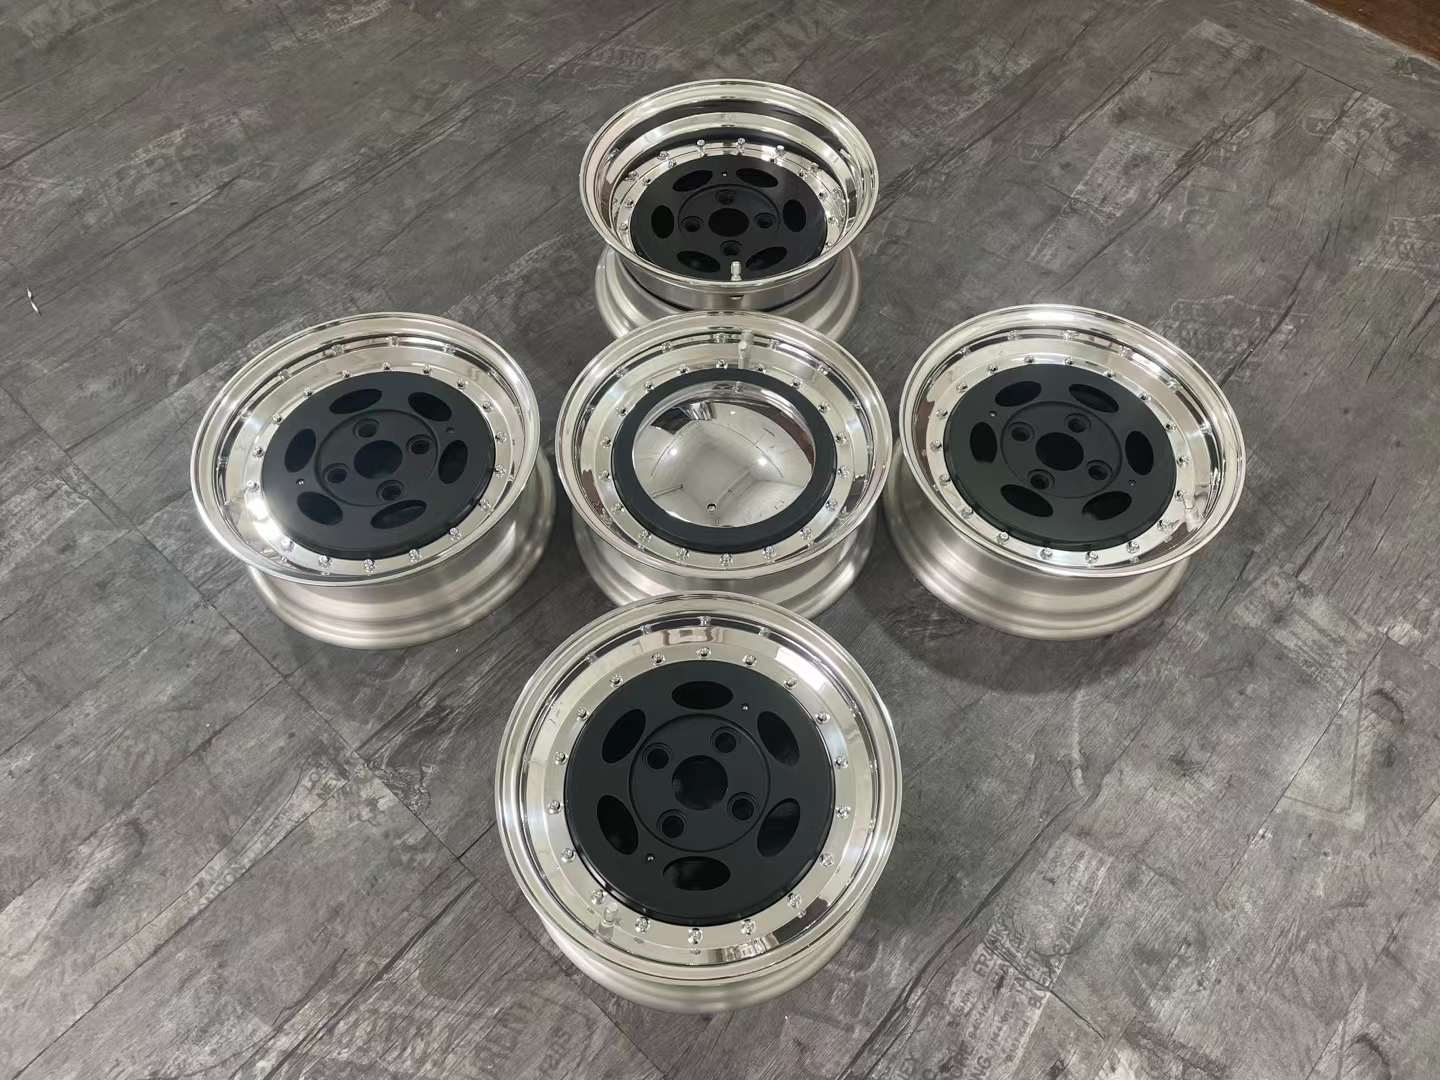 Production of Wuling 14x5J 3-piece wheel completed